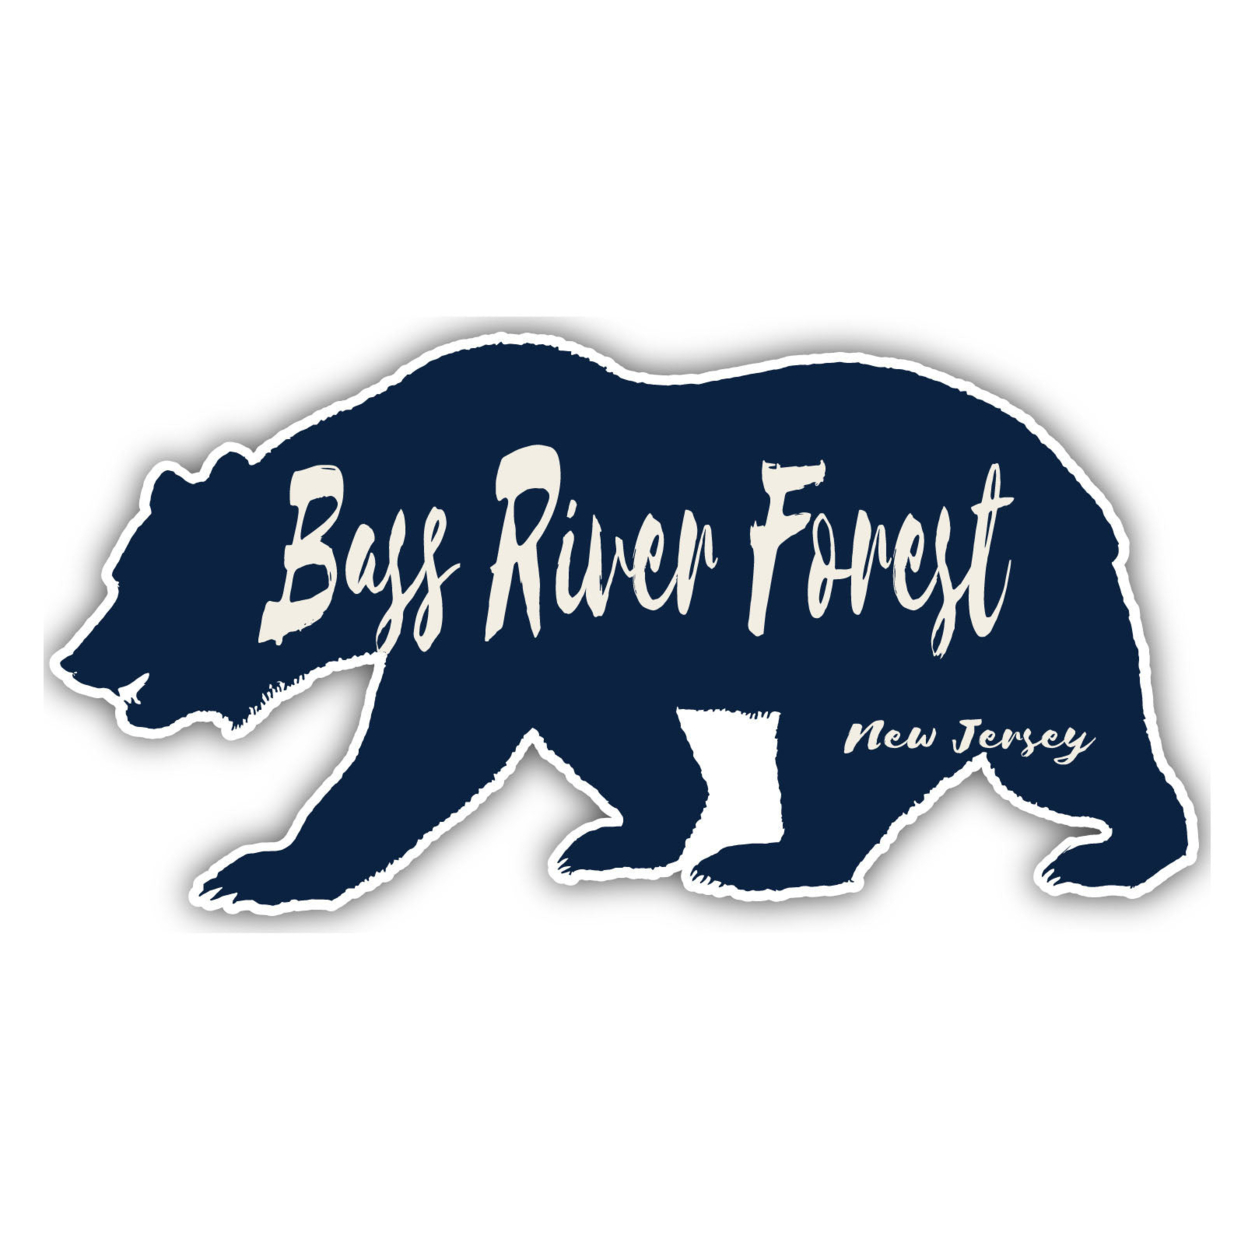 Bass River Forest New Jersey Souvenir Decorative Stickers (Choose Theme And Size) - Single Unit, 10-Inch, Bear